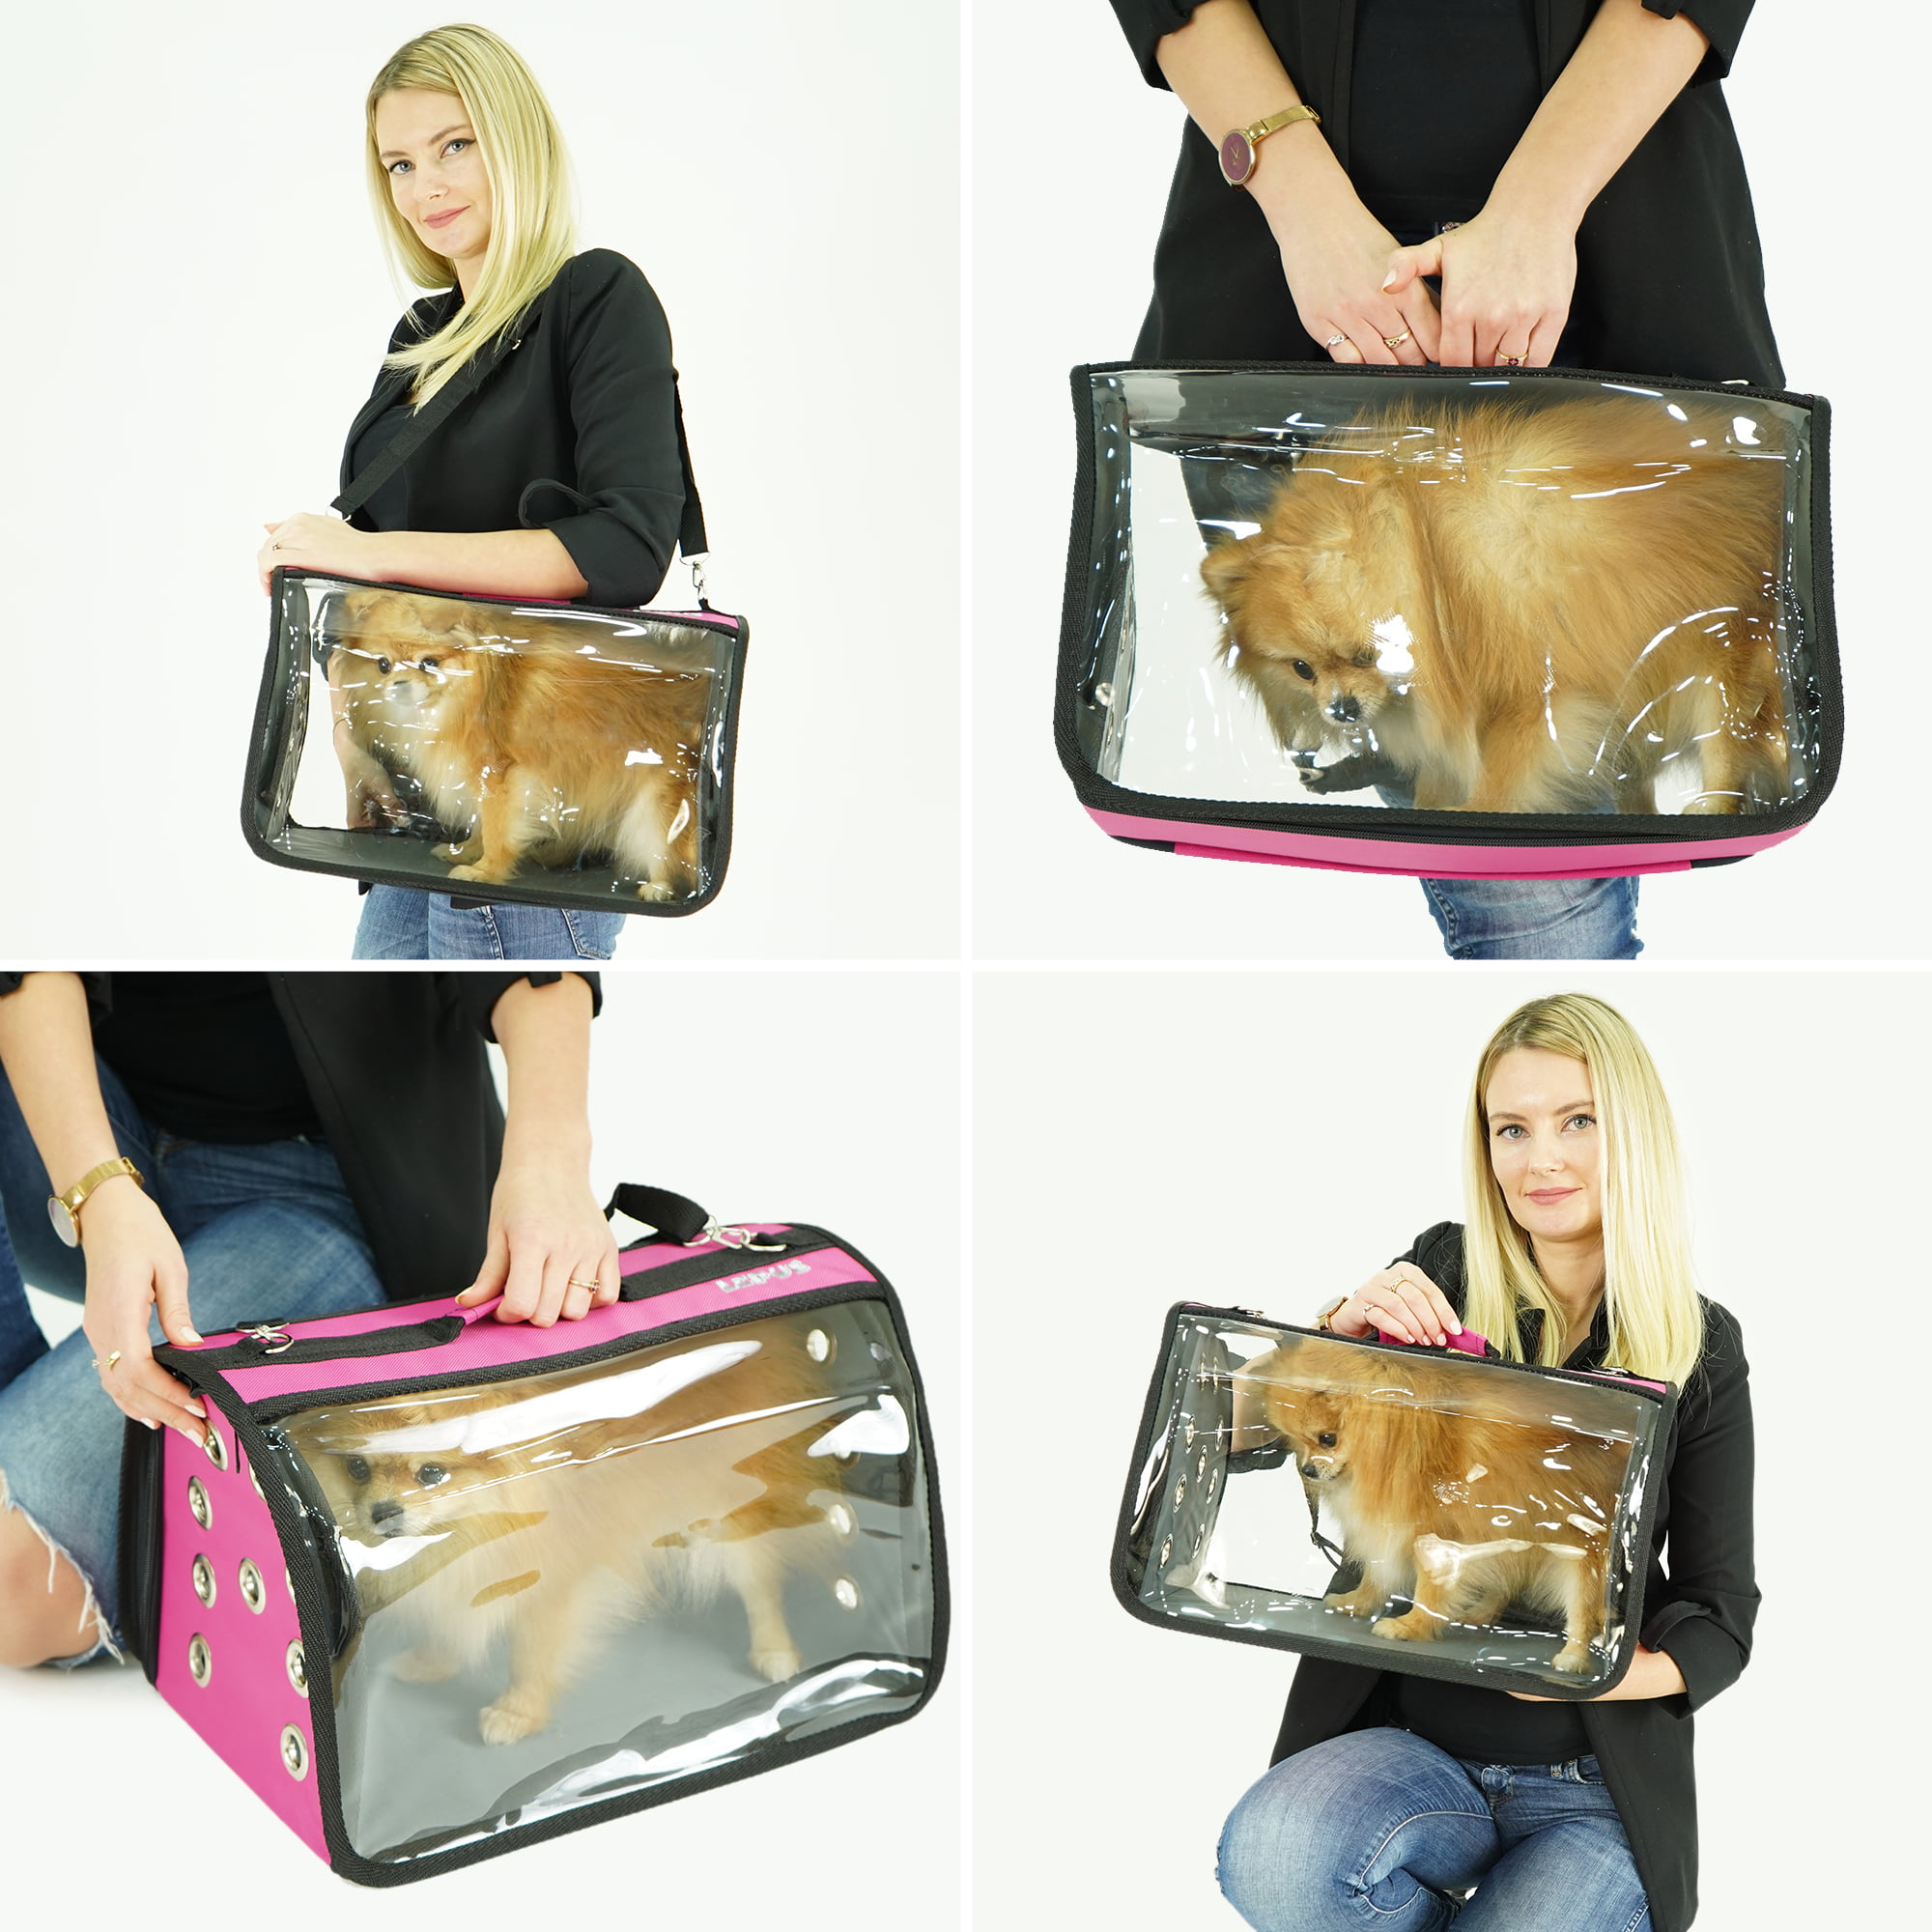  ONECUTE Dog Carrier for Small Dogs Rabbit cat with Large  Pockets, Cotton Bag, Dog Carrier Soft Sided, Collapsible Travel Puppy  Carrier(Small, up to 6lbs, 13.5 * 6.5 * 10 Inches, Beige) : Pet Supplies